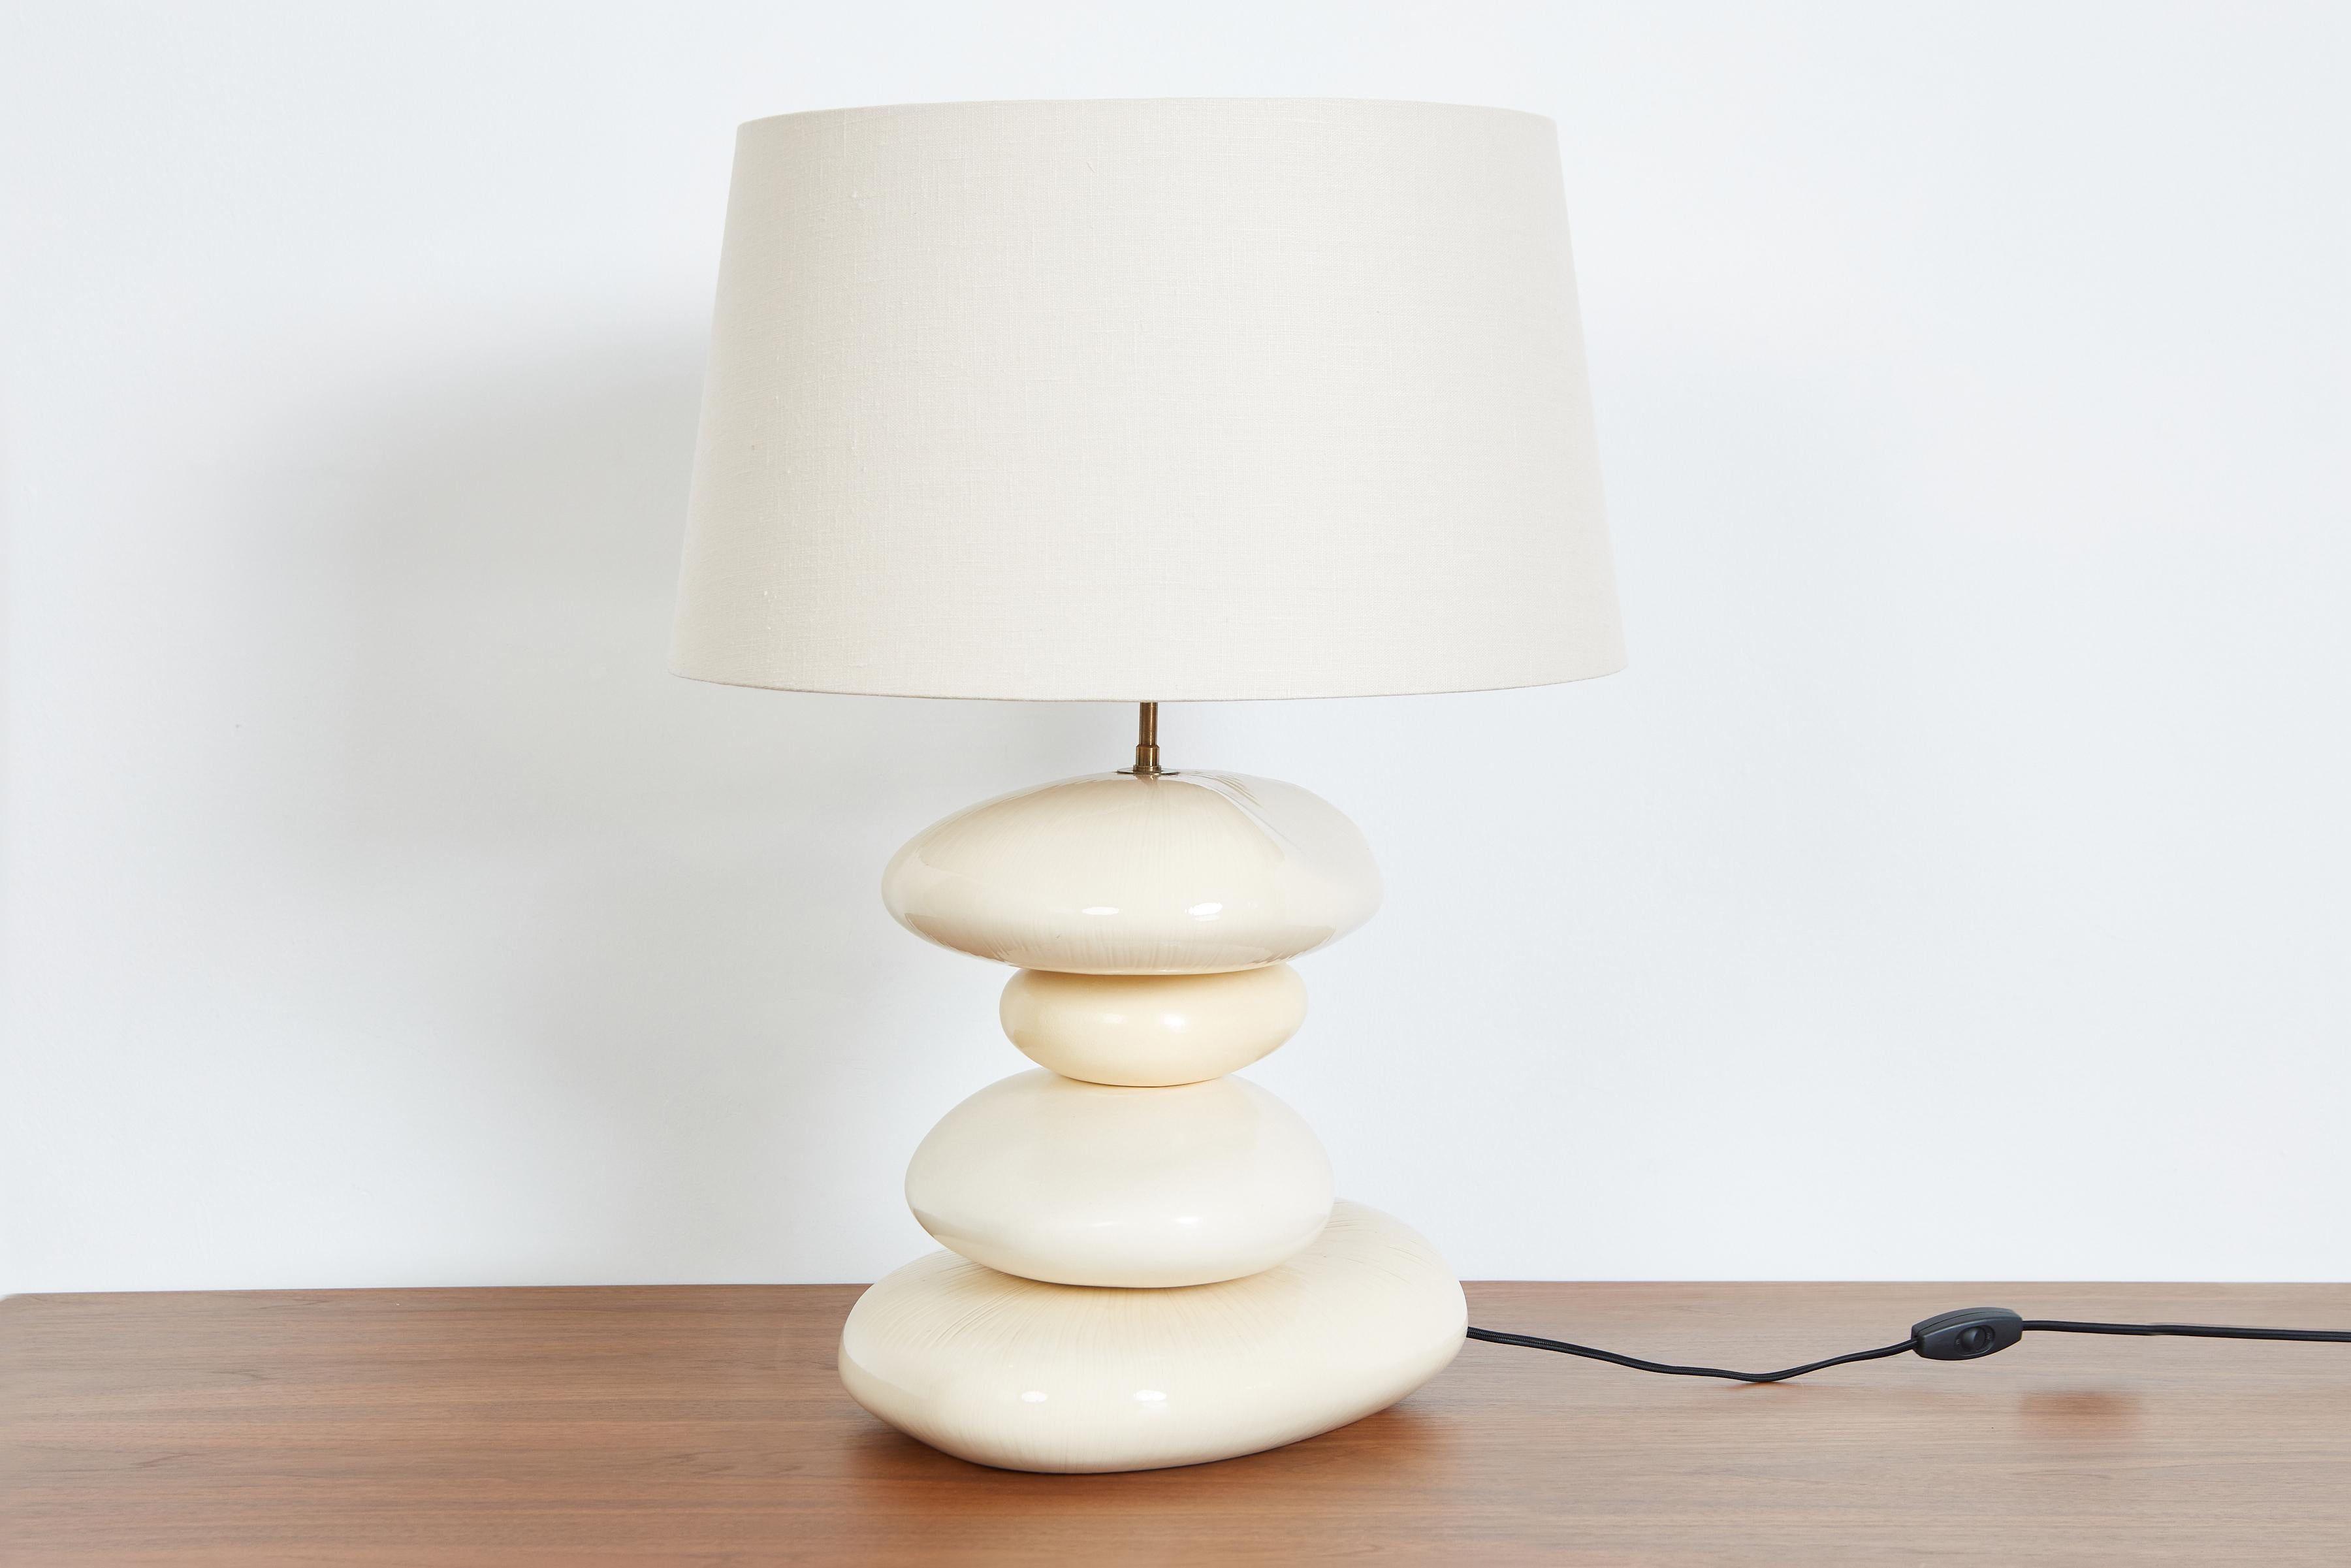 Incredible 1960's French Ceramic Table Lamp with varying organic shapes in shades of cream and white. 
Newly rewired with linen shade